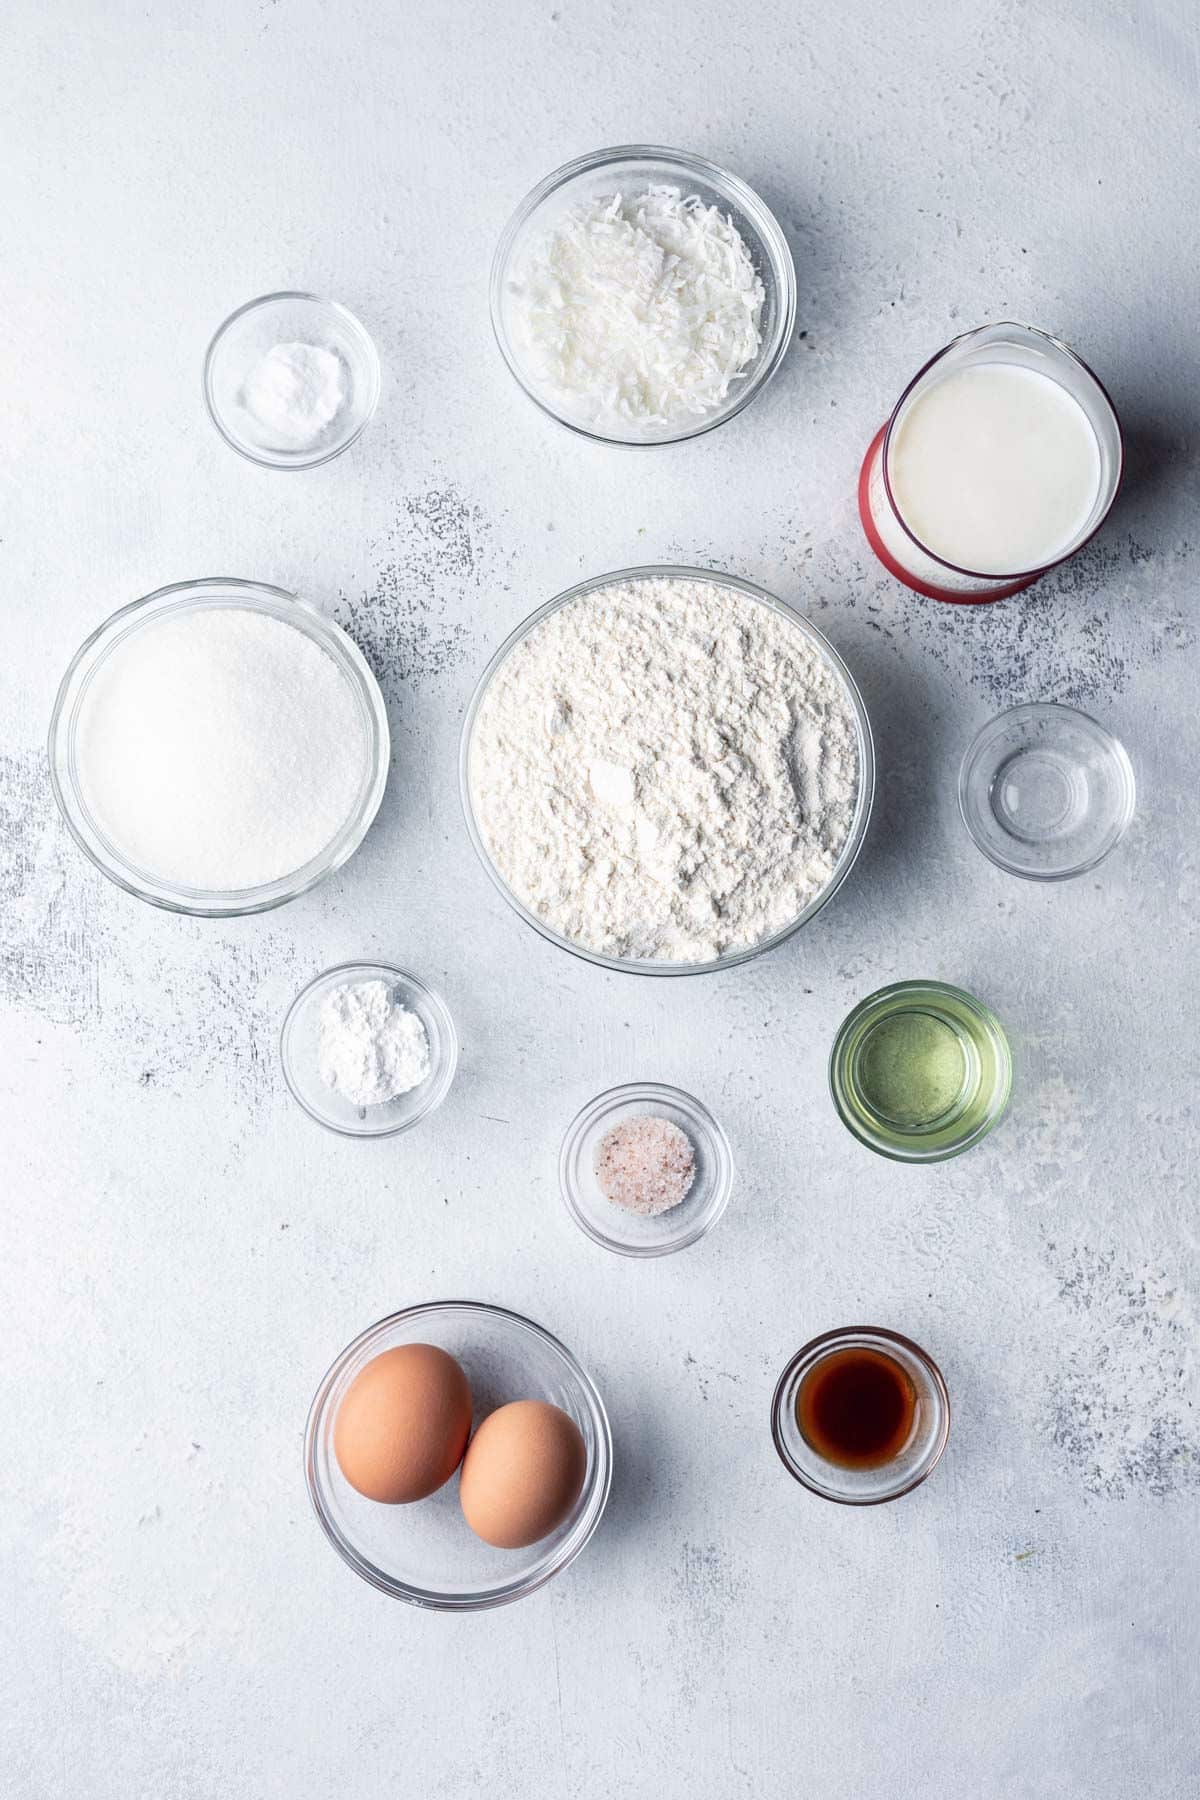 Ingredients for coconut muffins in dishes.